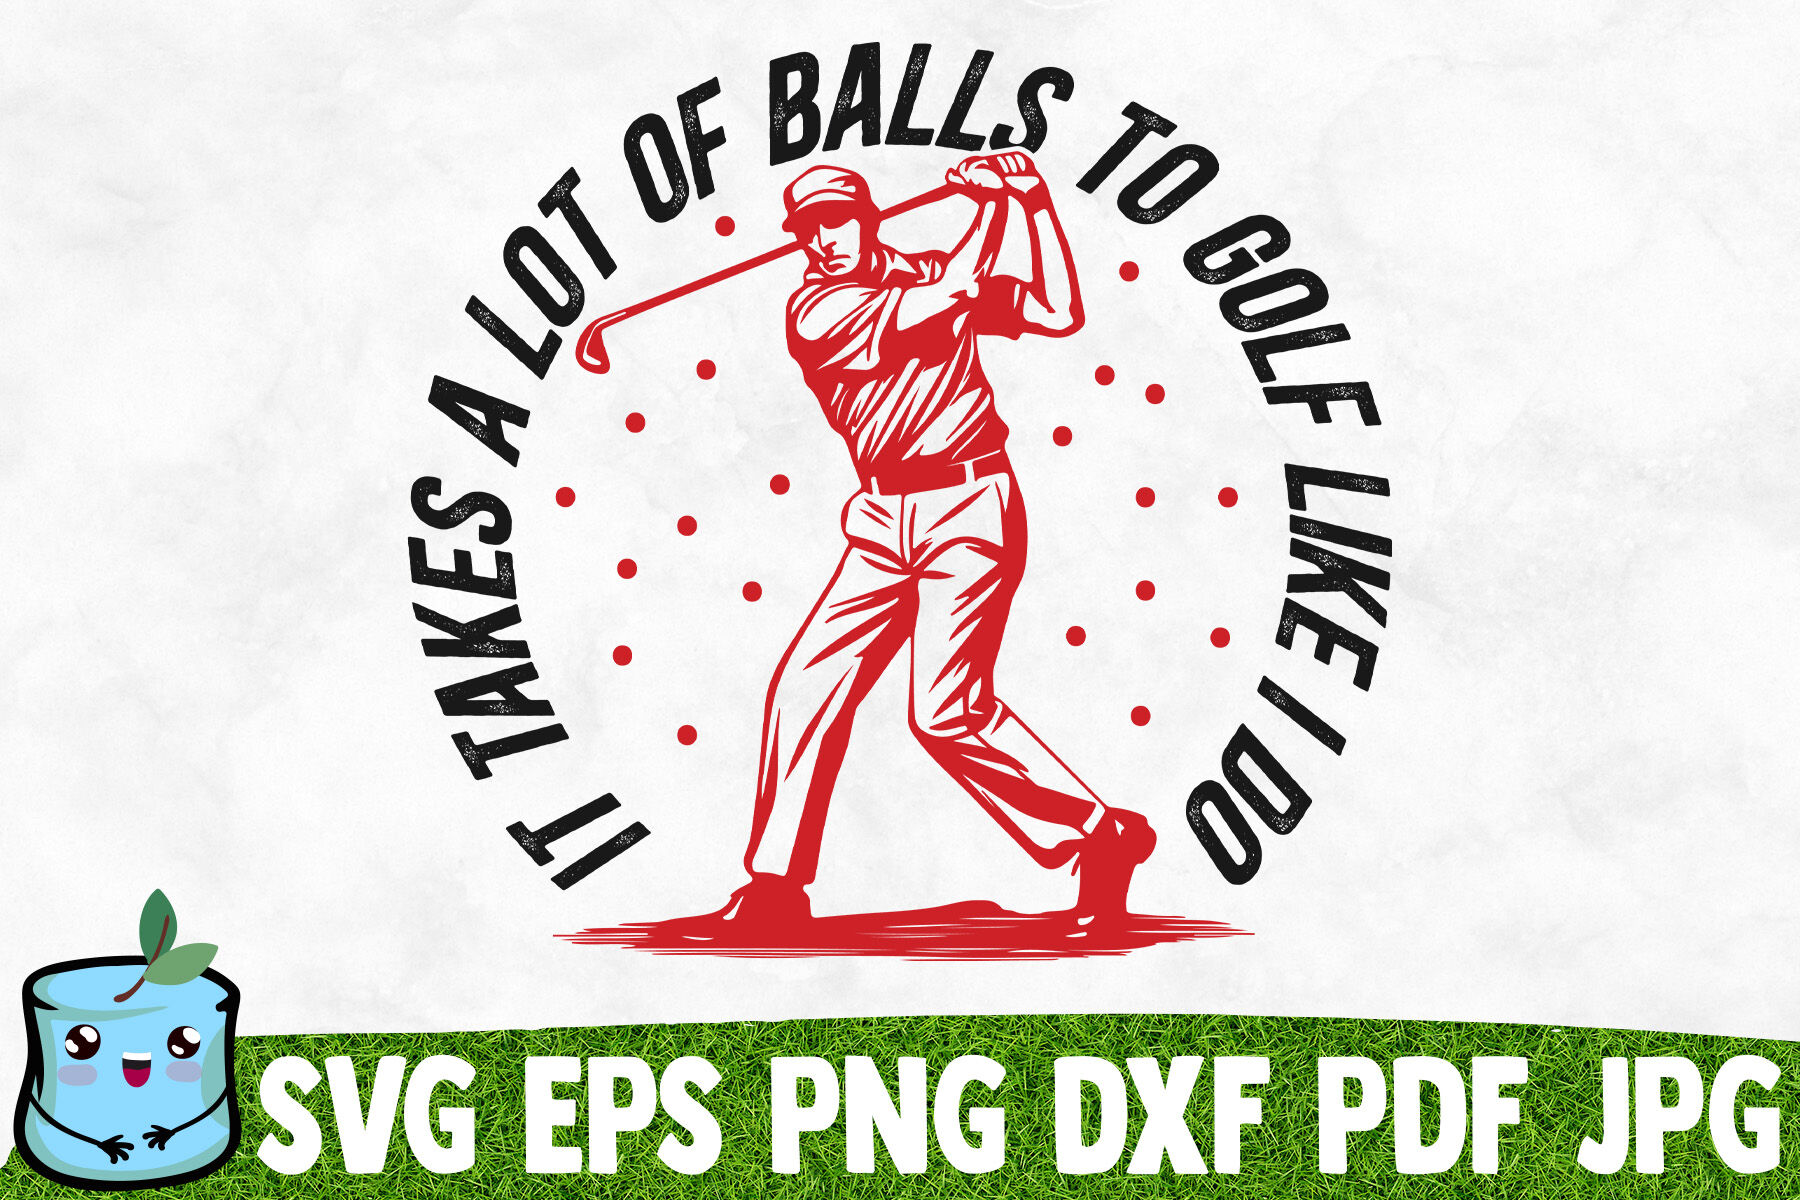 It Takes A Lot of Balls to Golf Like I Do Svg, Png, Eps, Pdf Files